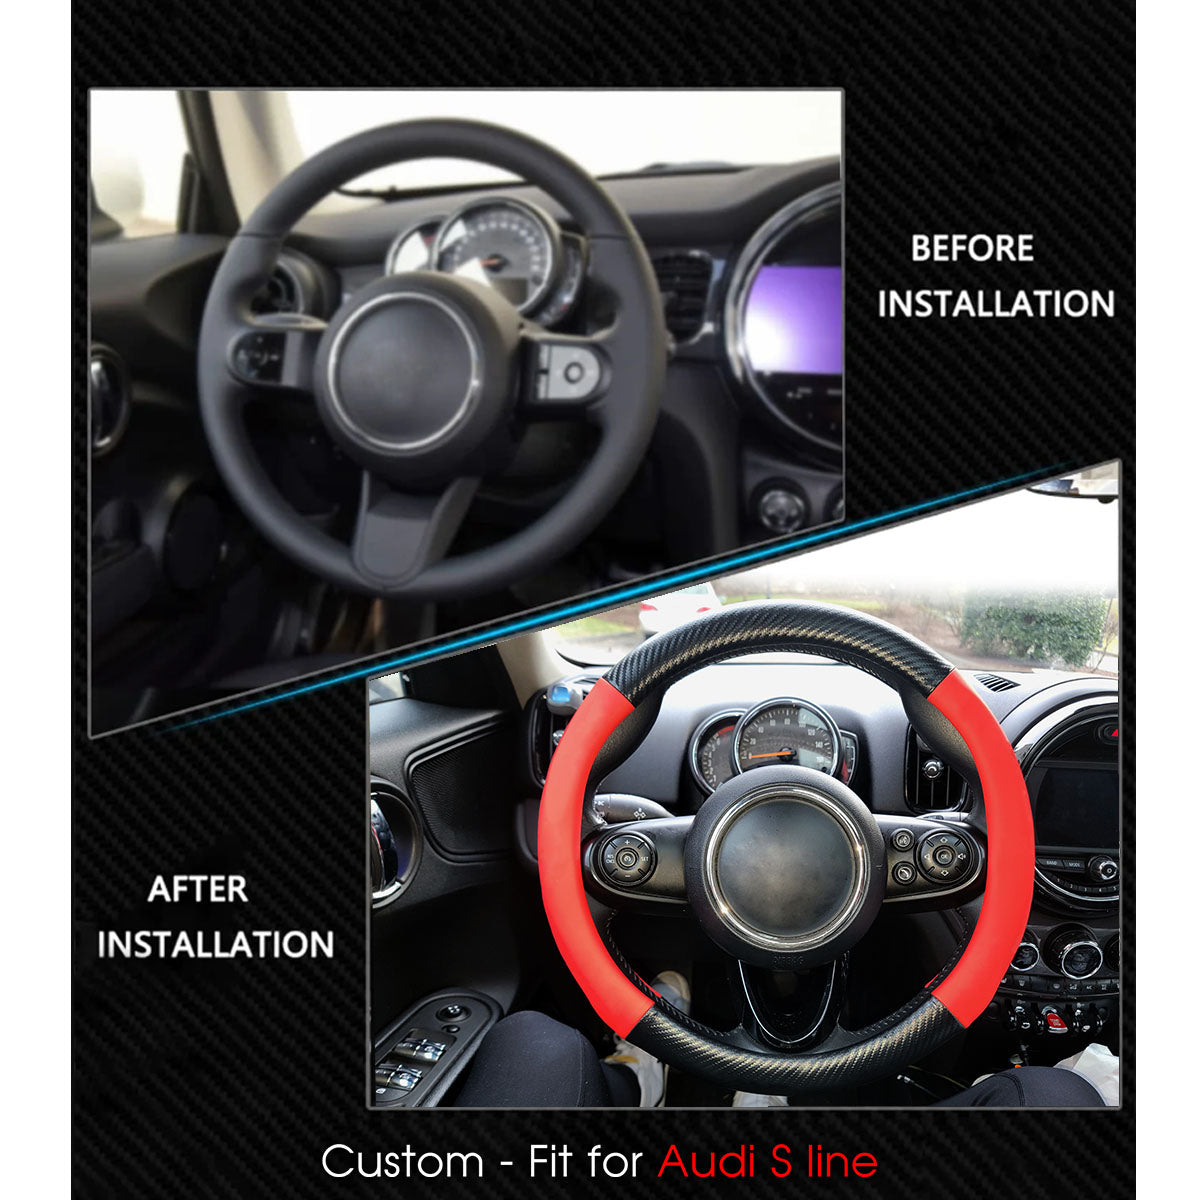 Car Steering Wheel Cover, Custom-Fit For Cars, Leather Nonslip 3D Carbon Fiber Texture Sport Style Wheel Cover for Women, Interior Modification for All Car Accessories DLVE225